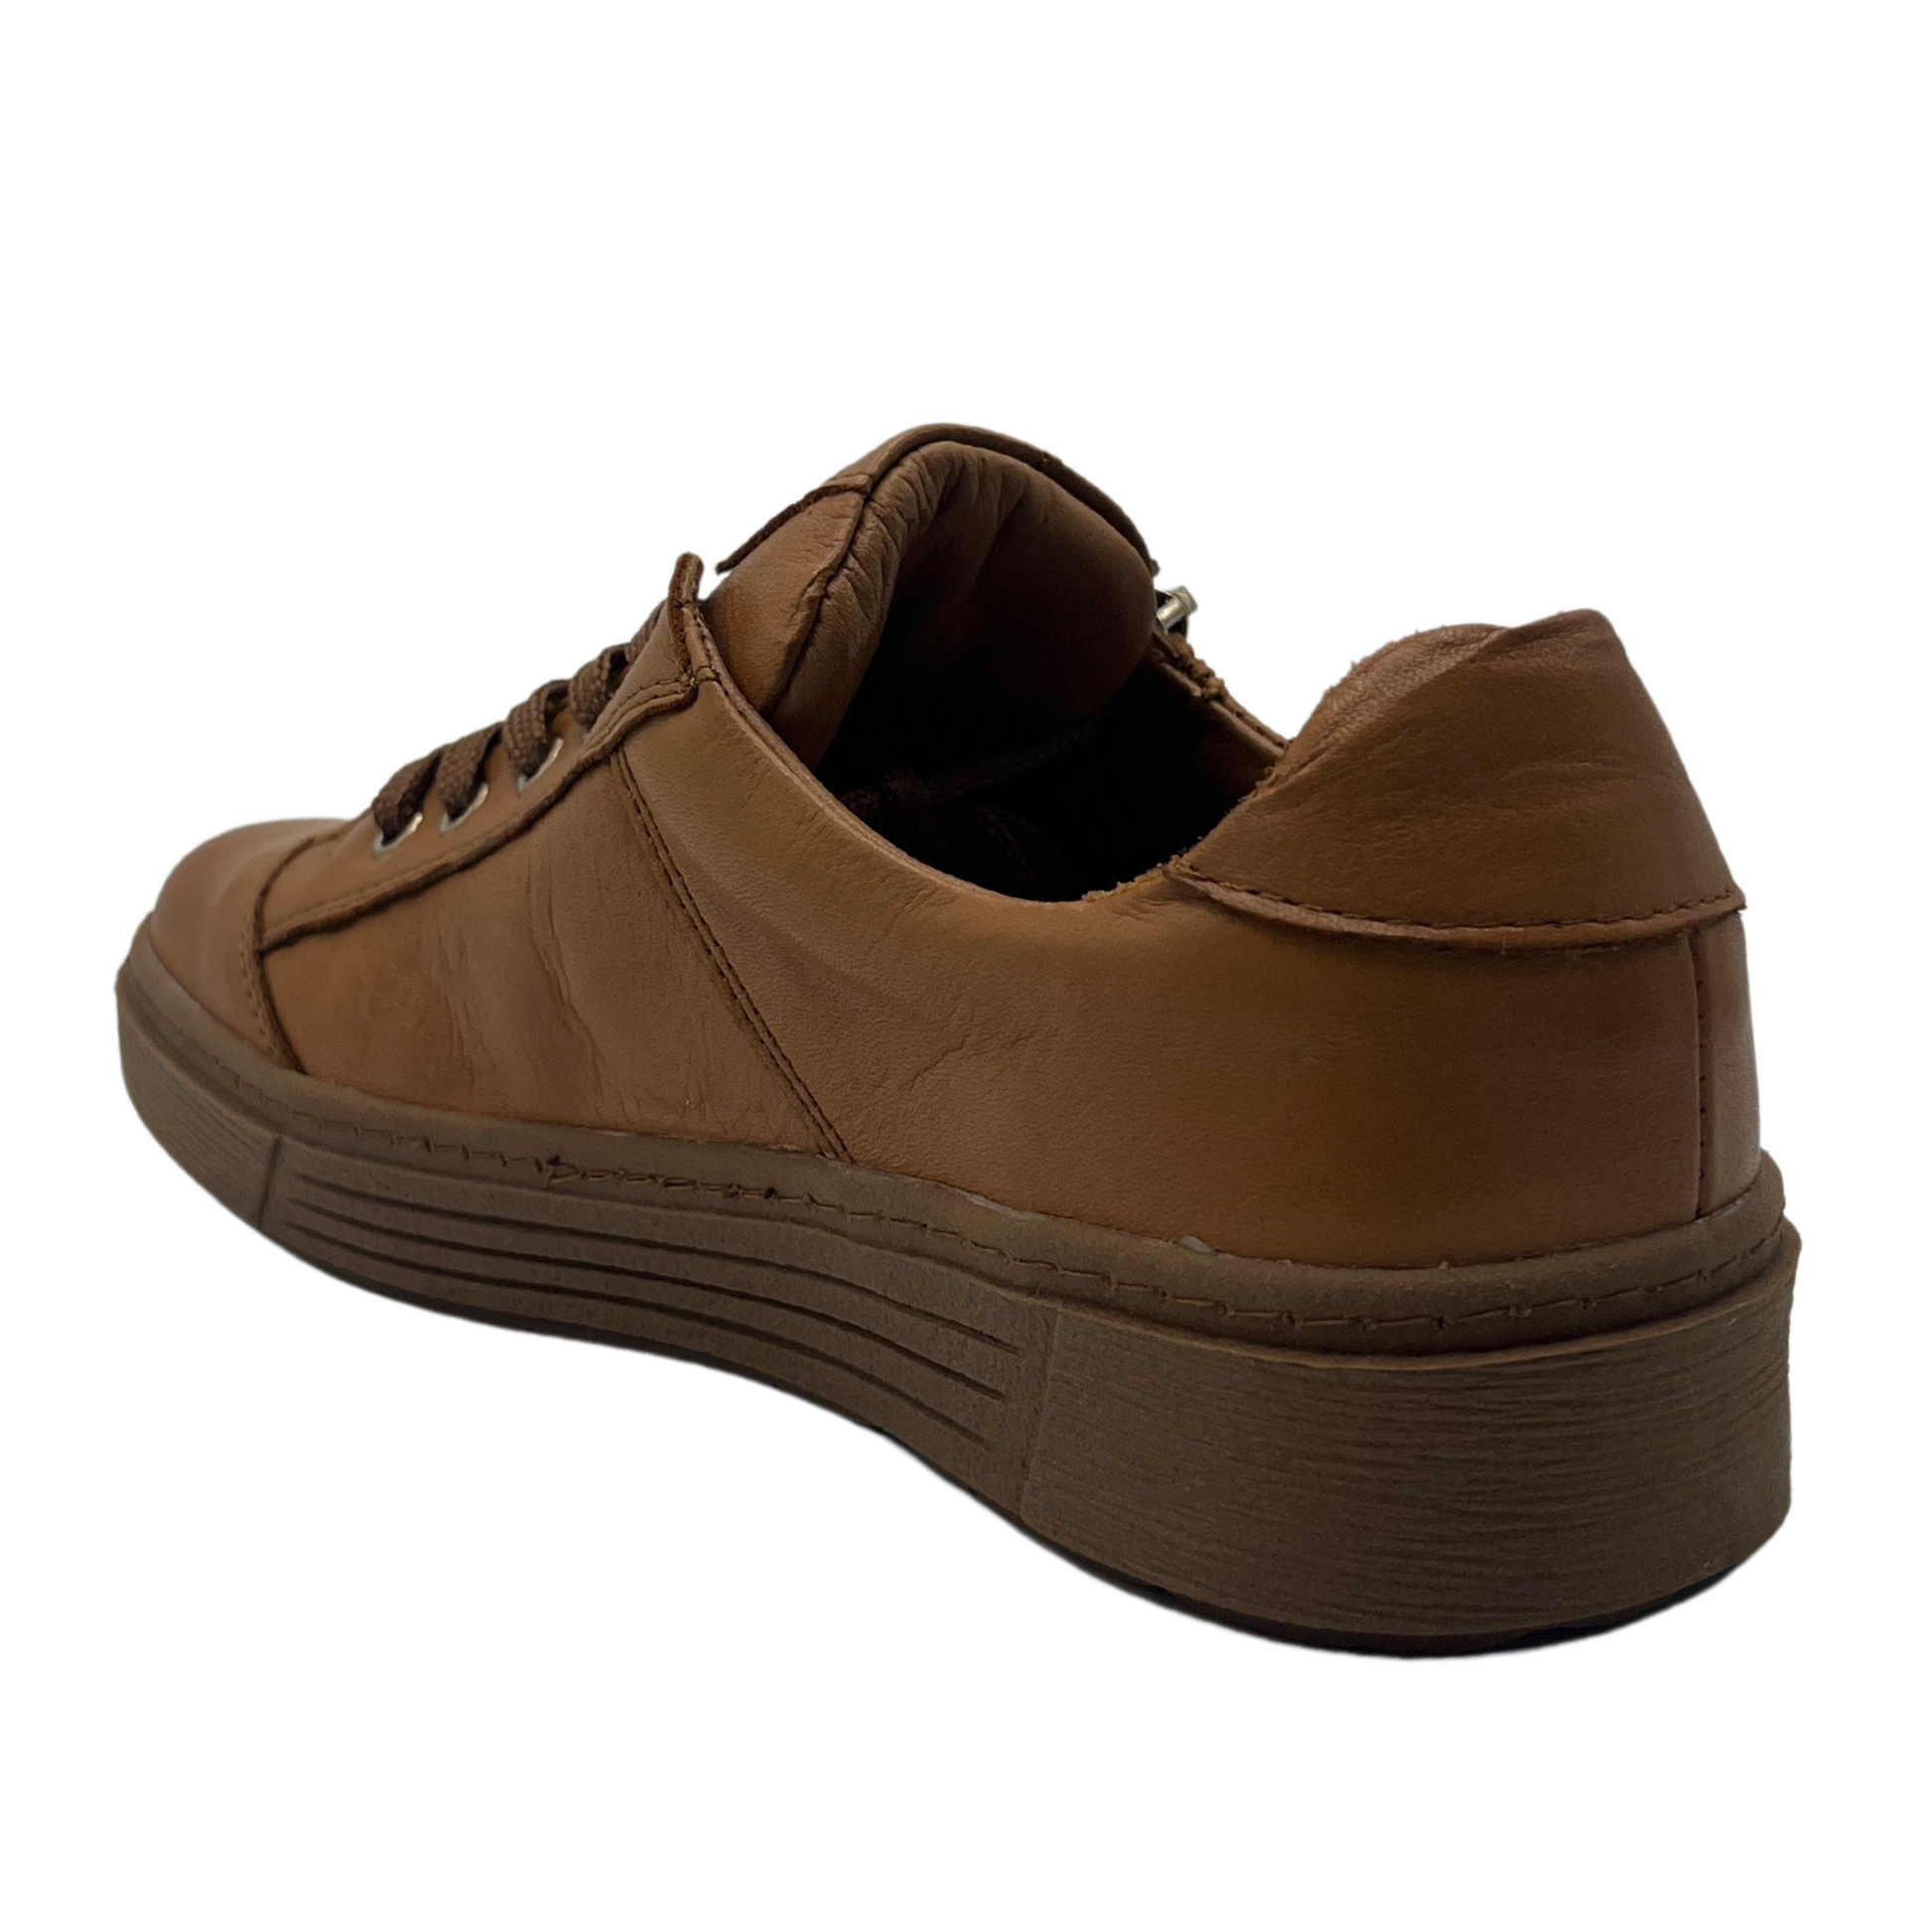 Back view of brown leather sneaker with matching laces and brown rubber outsole